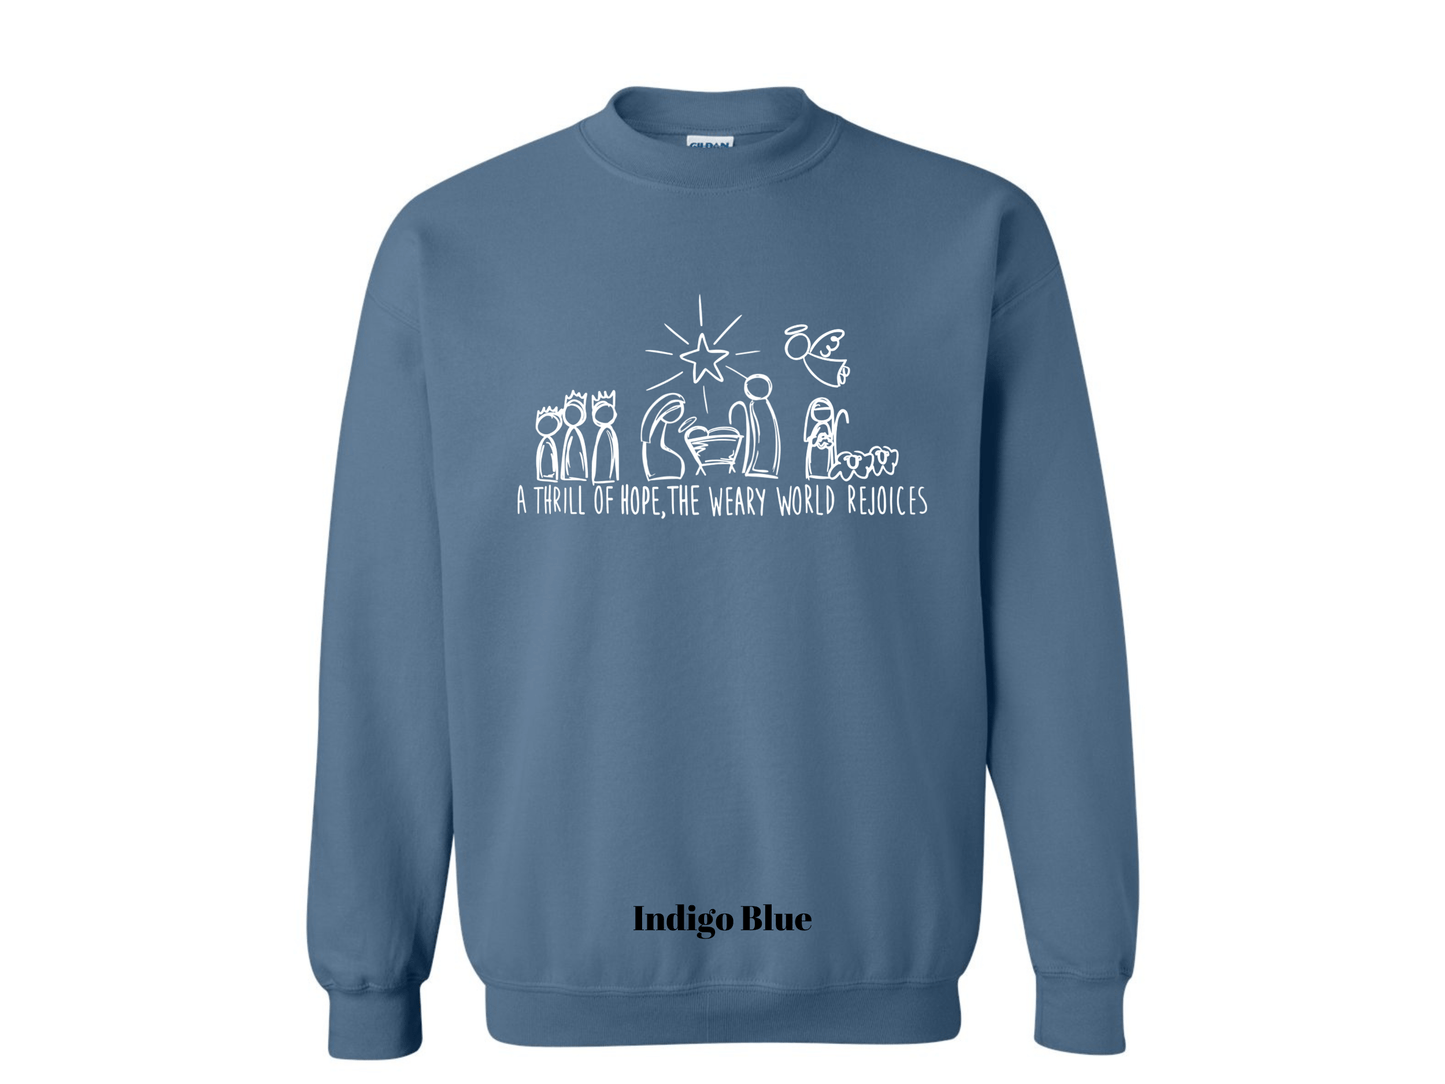 A Thrill of Hope, the Weary World Rejoices Crewneck Sweatshirt